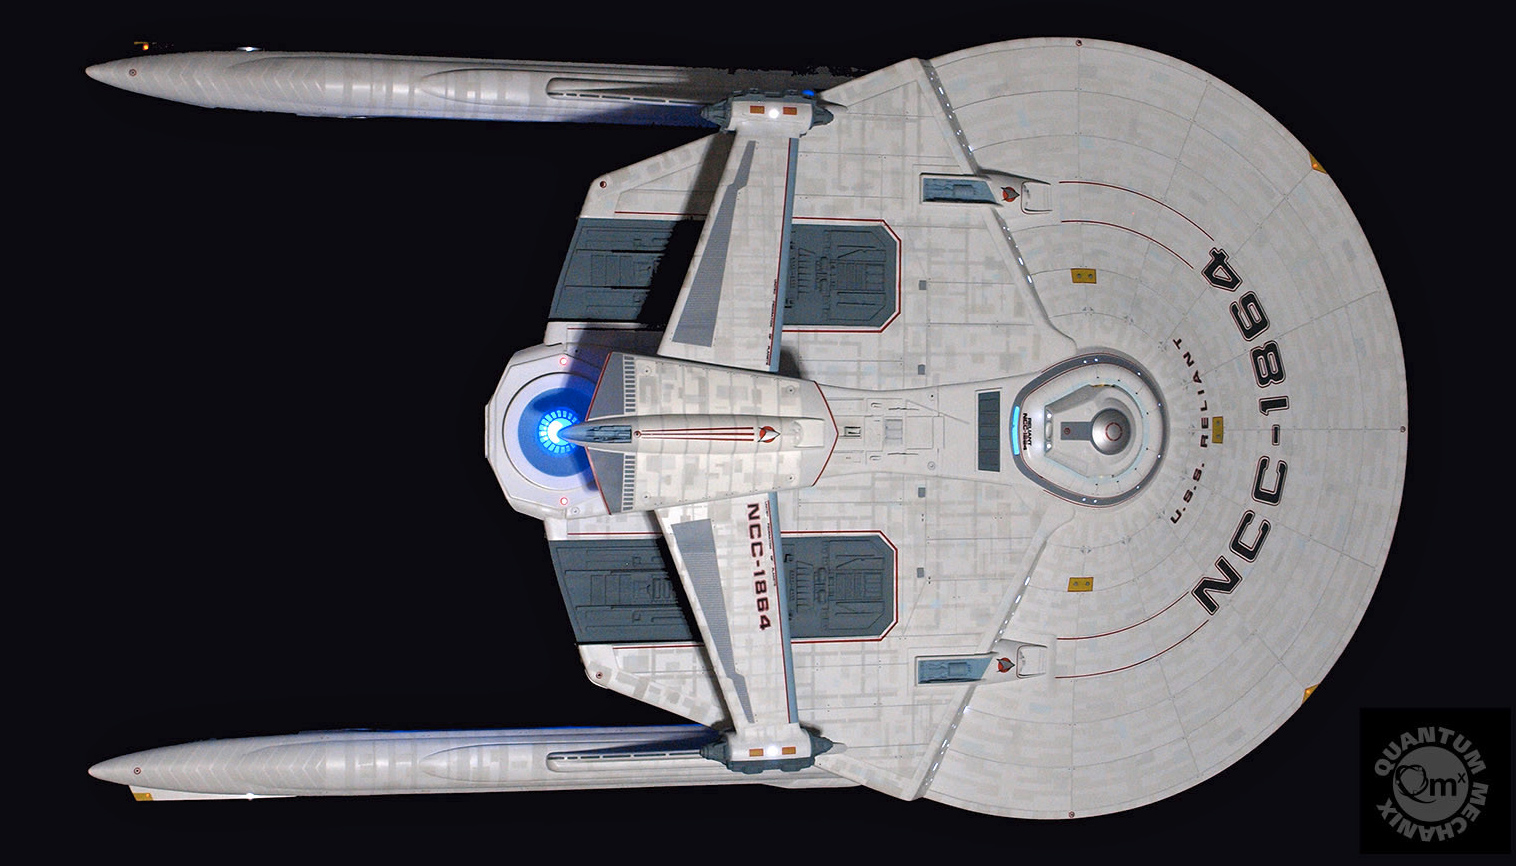 Your Collection Deserves This Screen-Accurate USS Reliant Replica